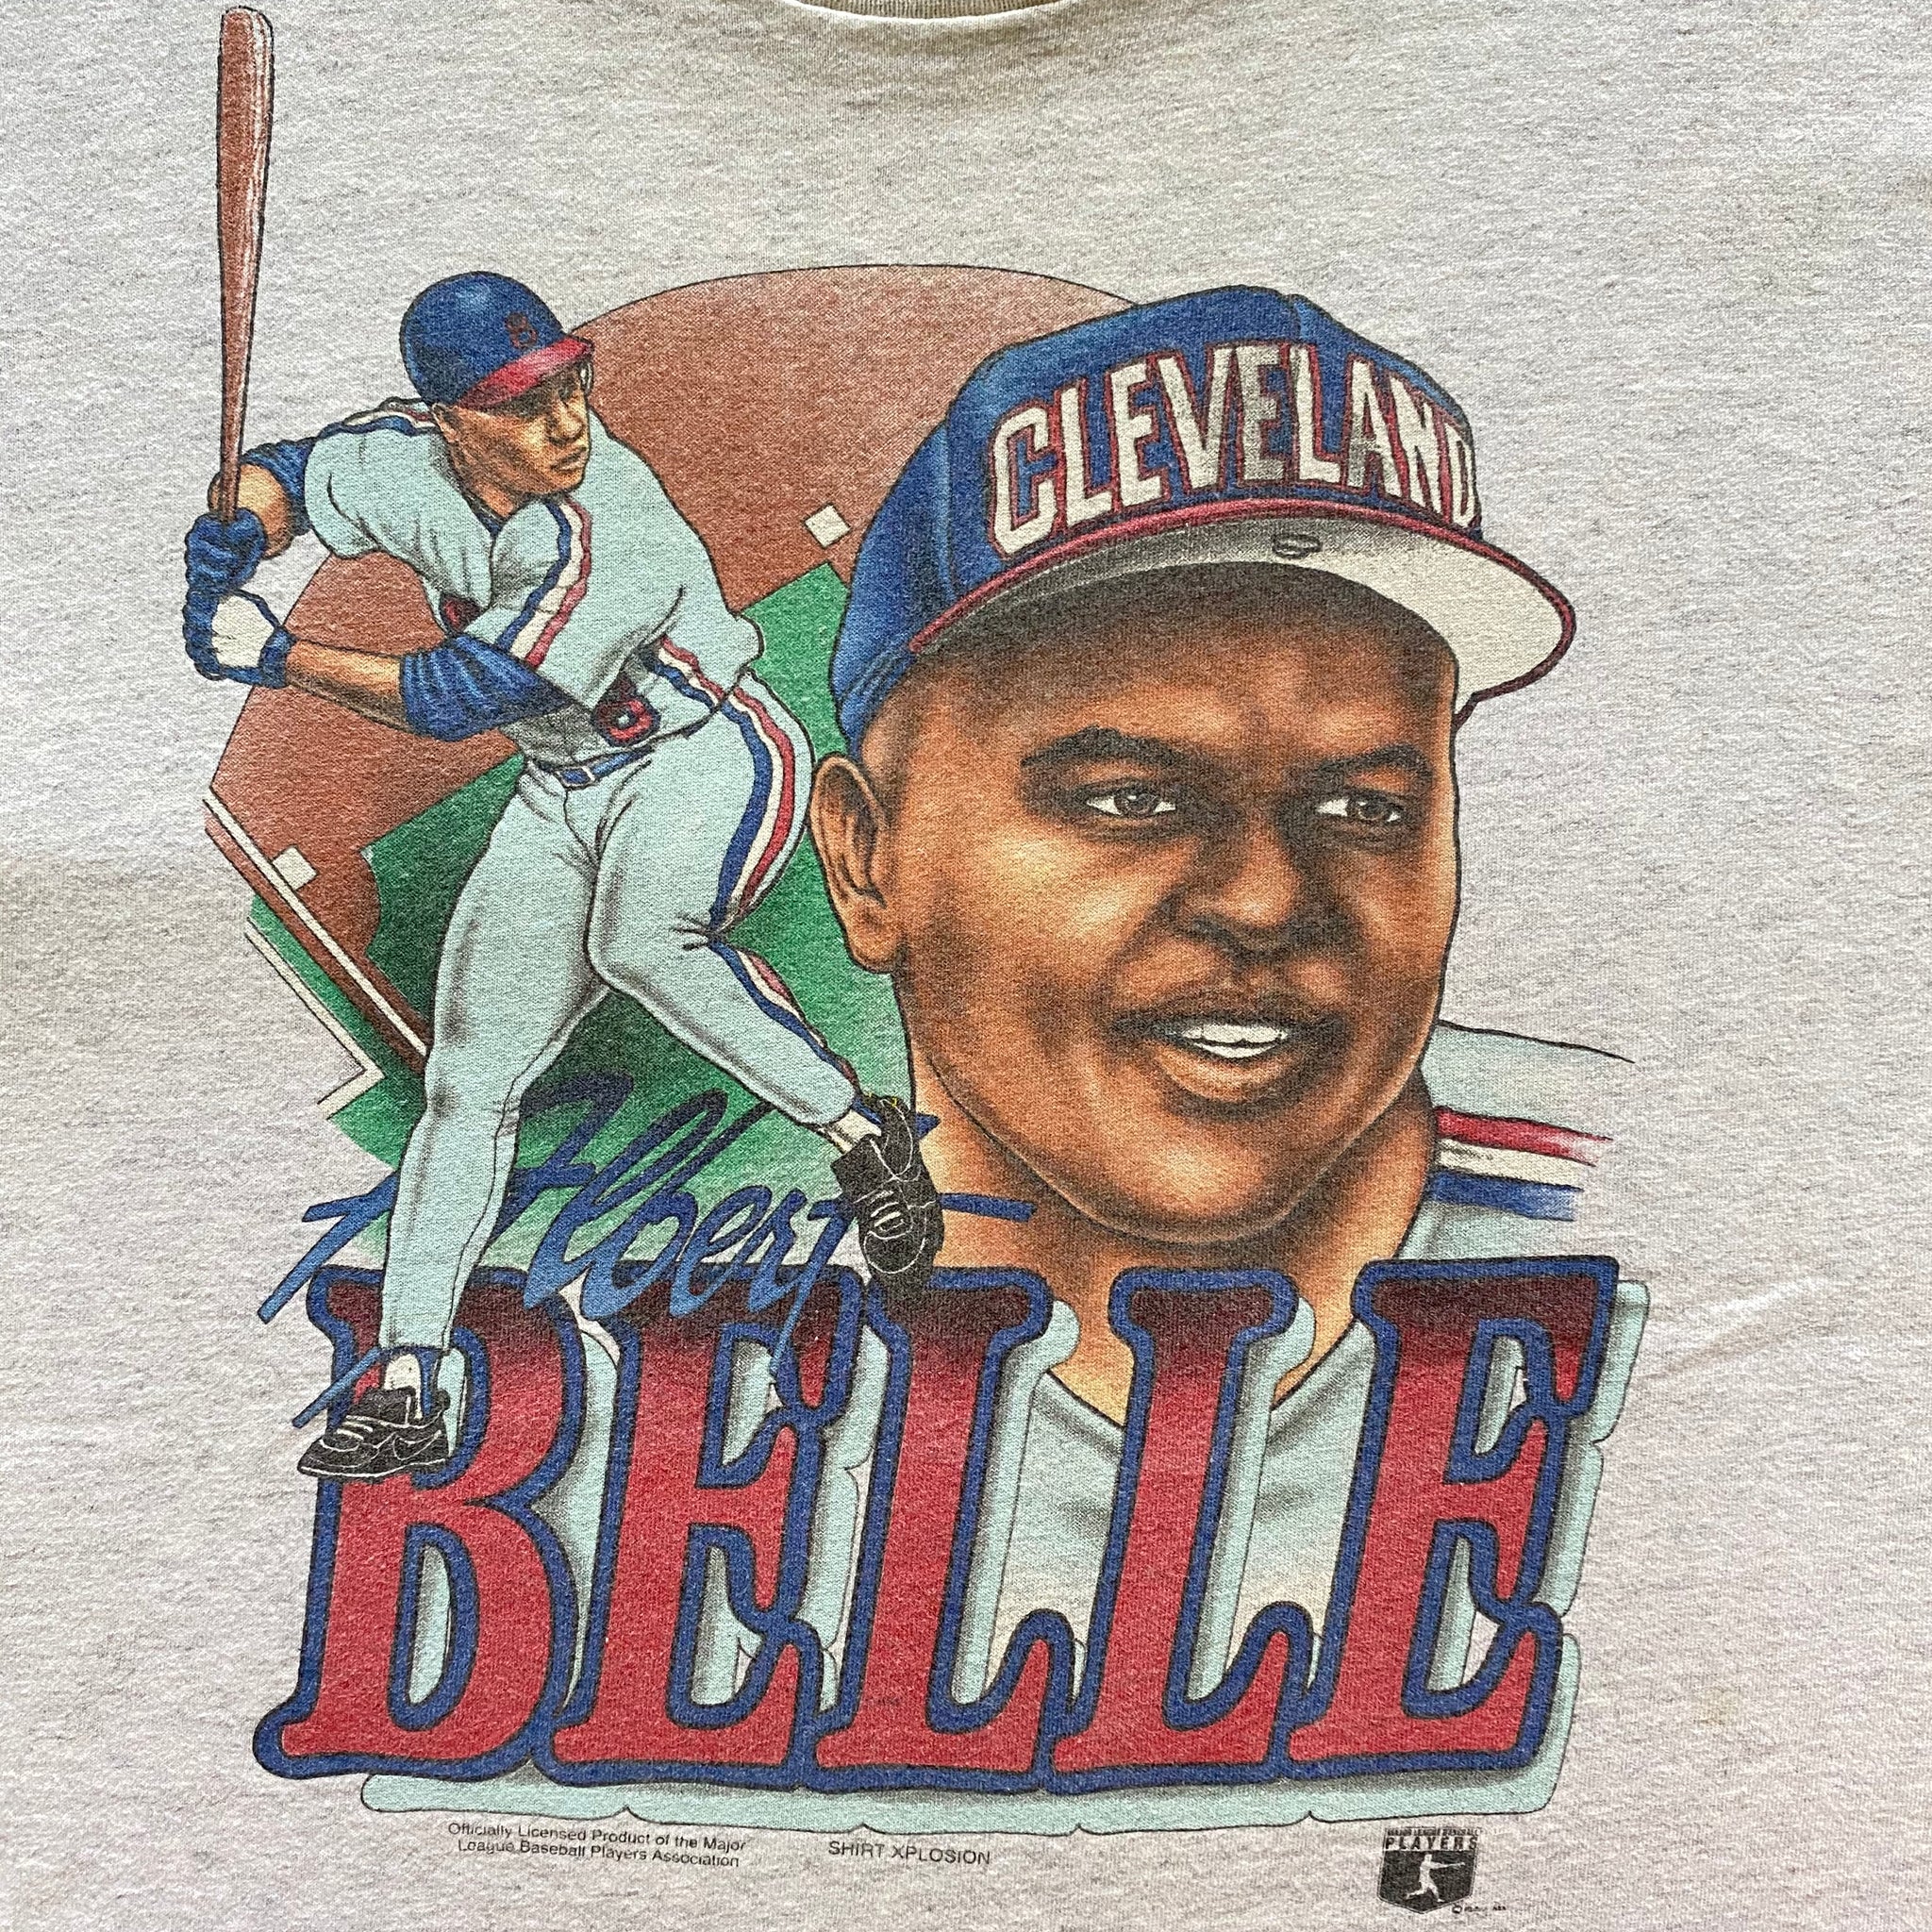 90s indians jersey